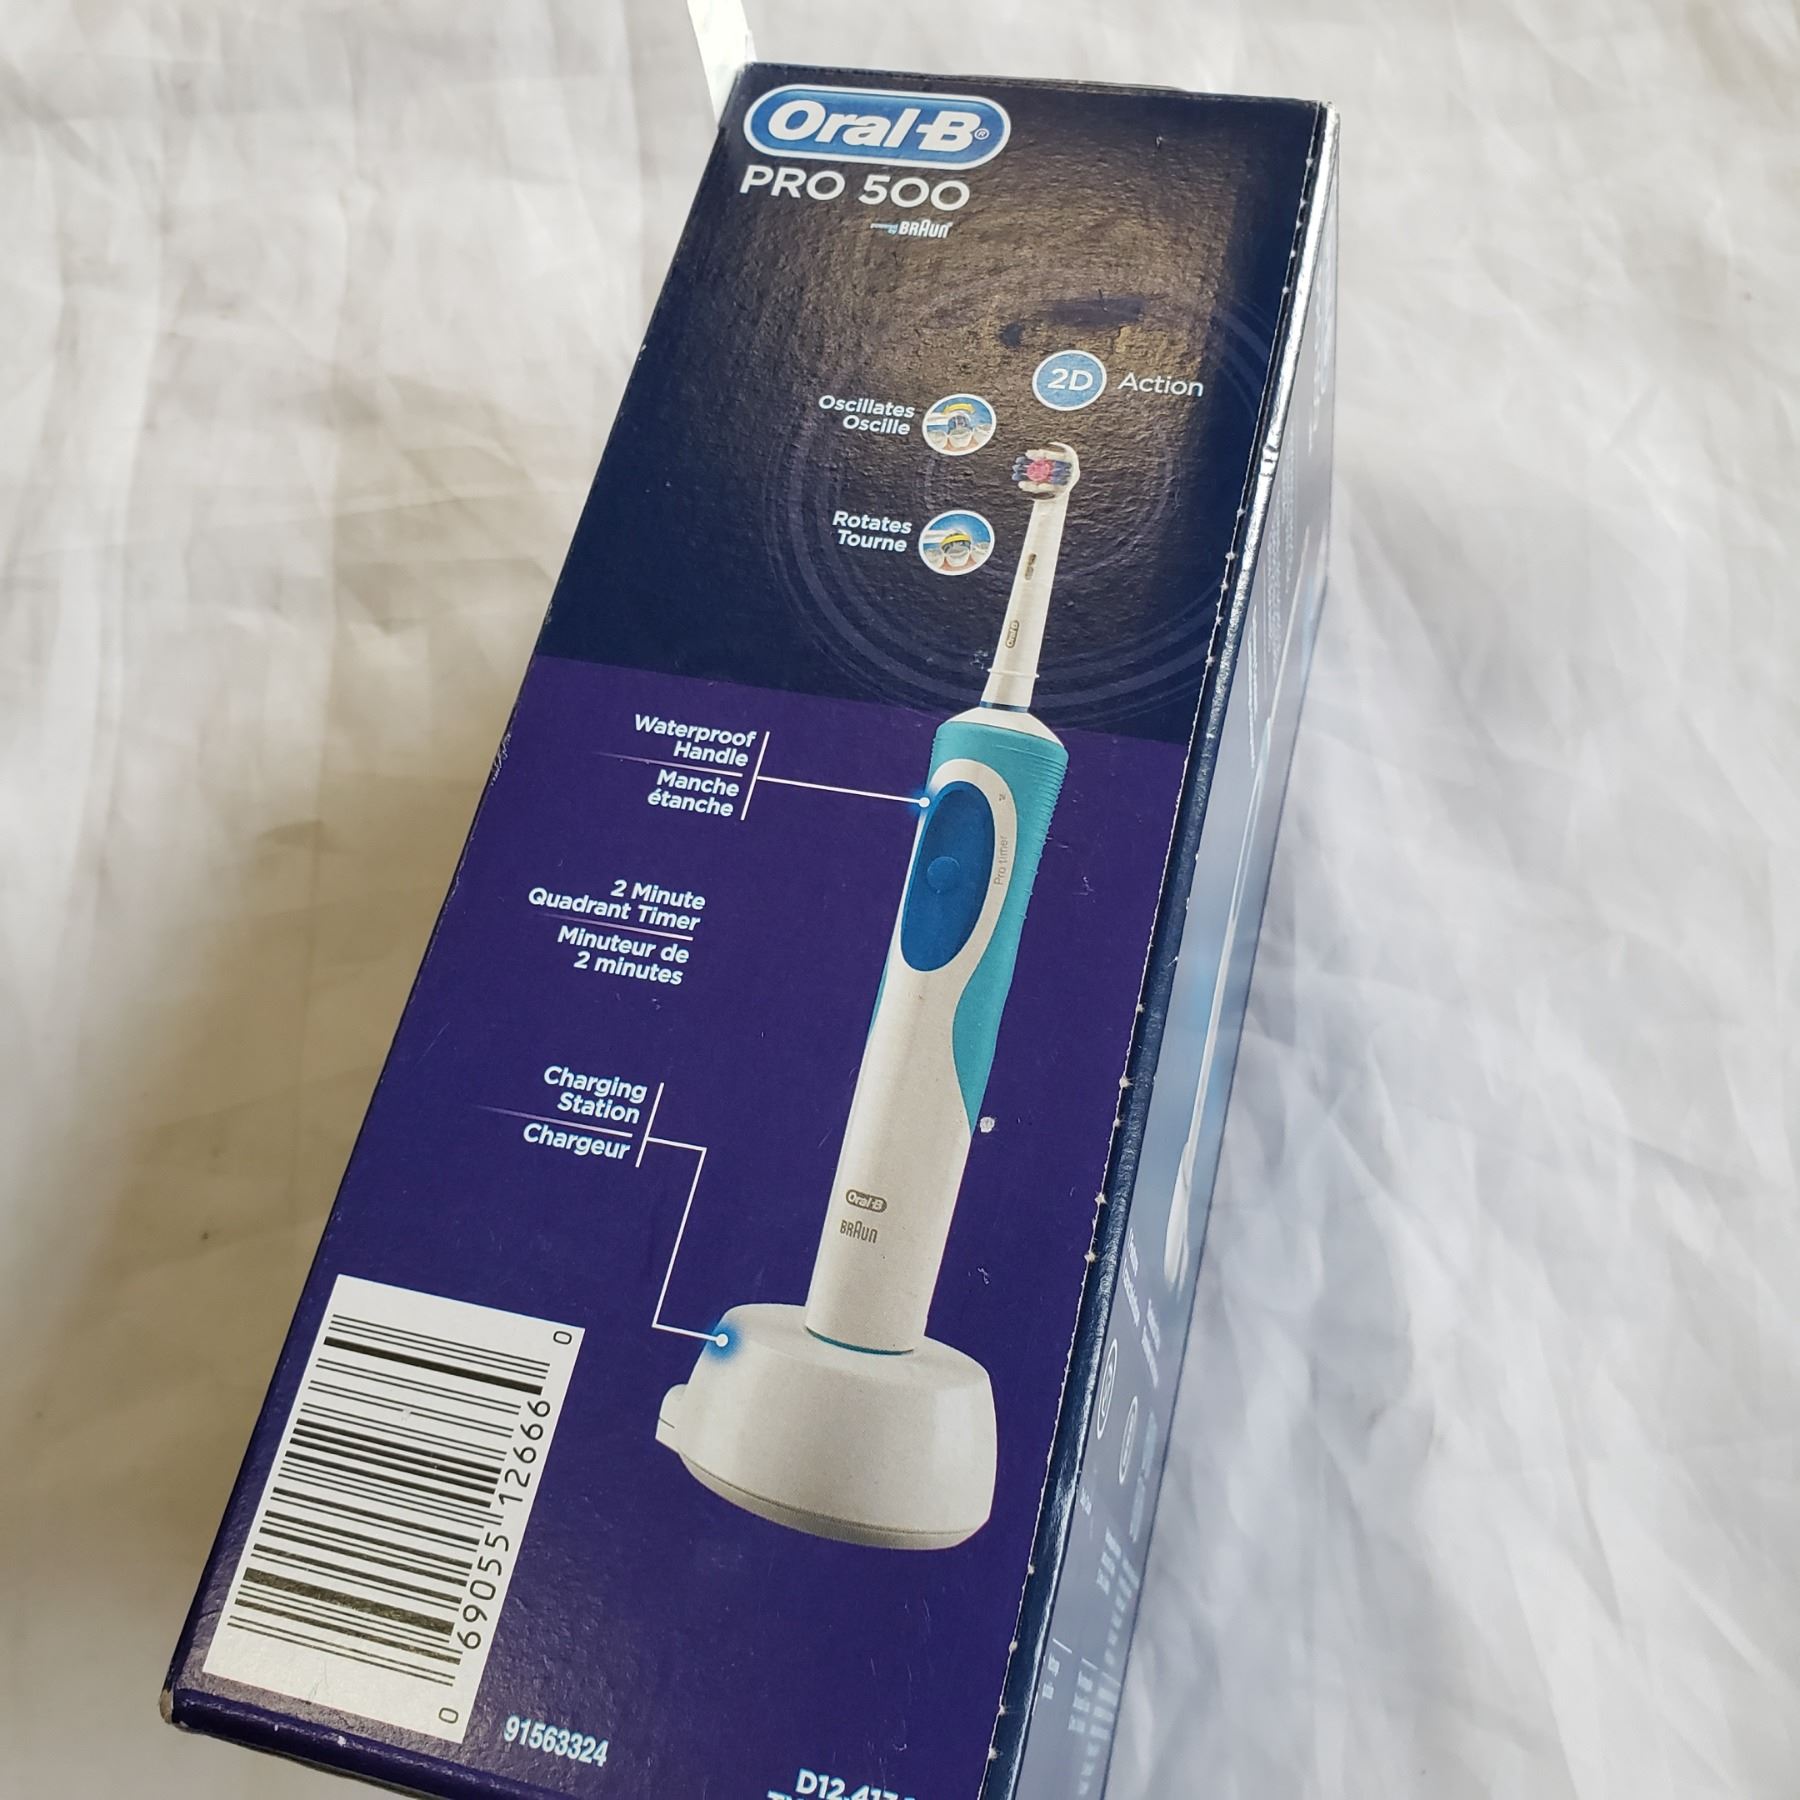 Oral B Pro 500 – An Excellent Electric Toothbrush